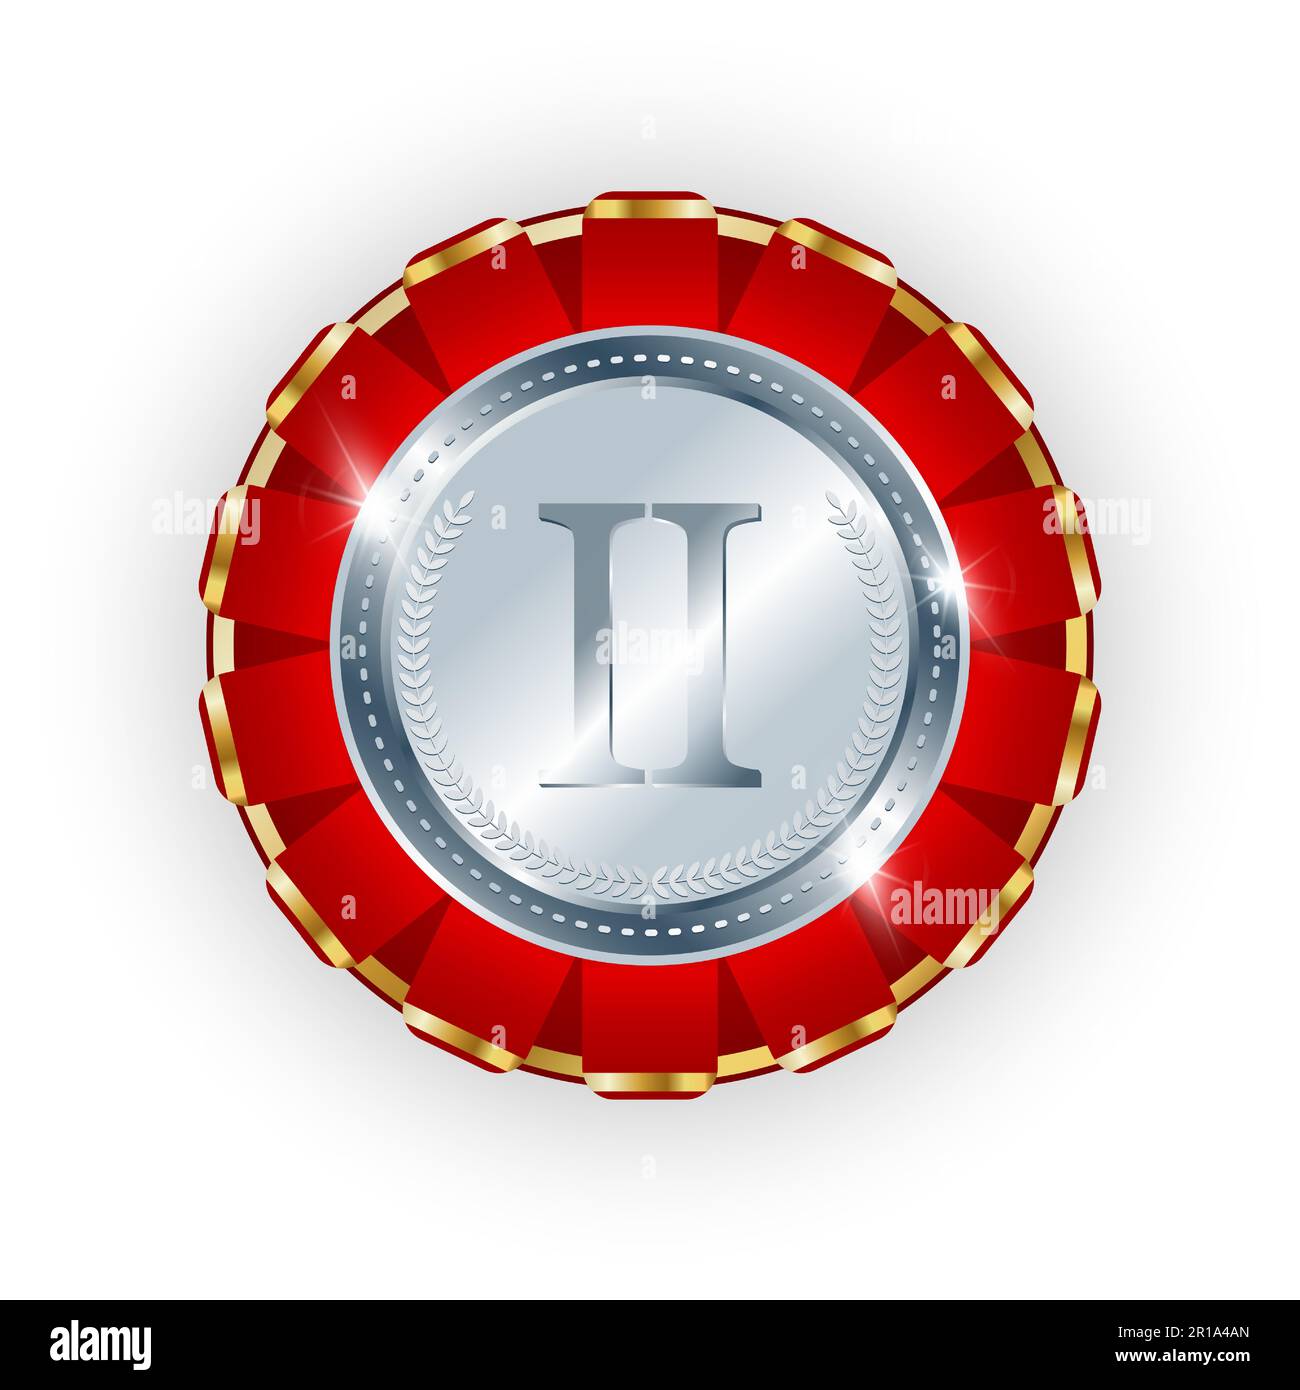 A silver circular medal adorned with red ribbon folds, an award or badge of distinction for a winner. Vector illustration. Stock Vector